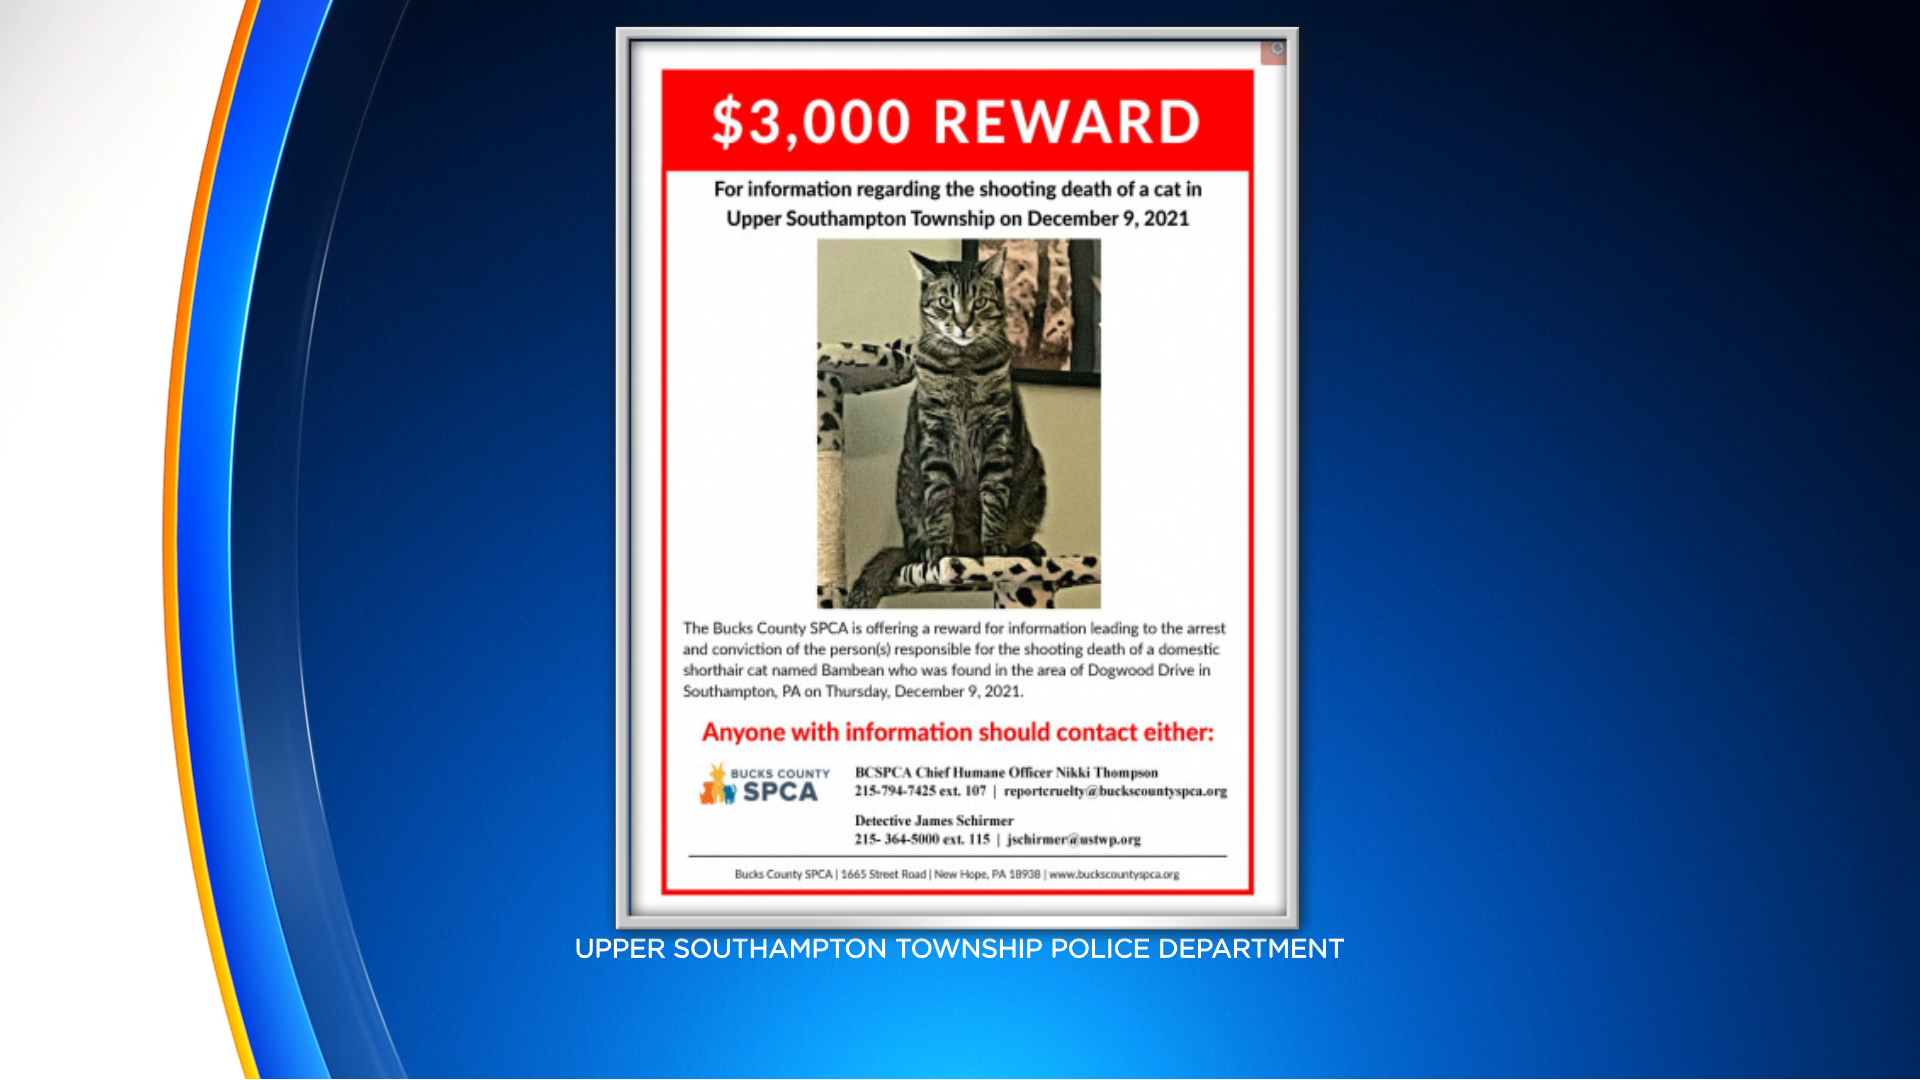 Bucks County SPCA Offering $3,000 Reward After Cat Was Shot, Killed In Upper Southampton Township